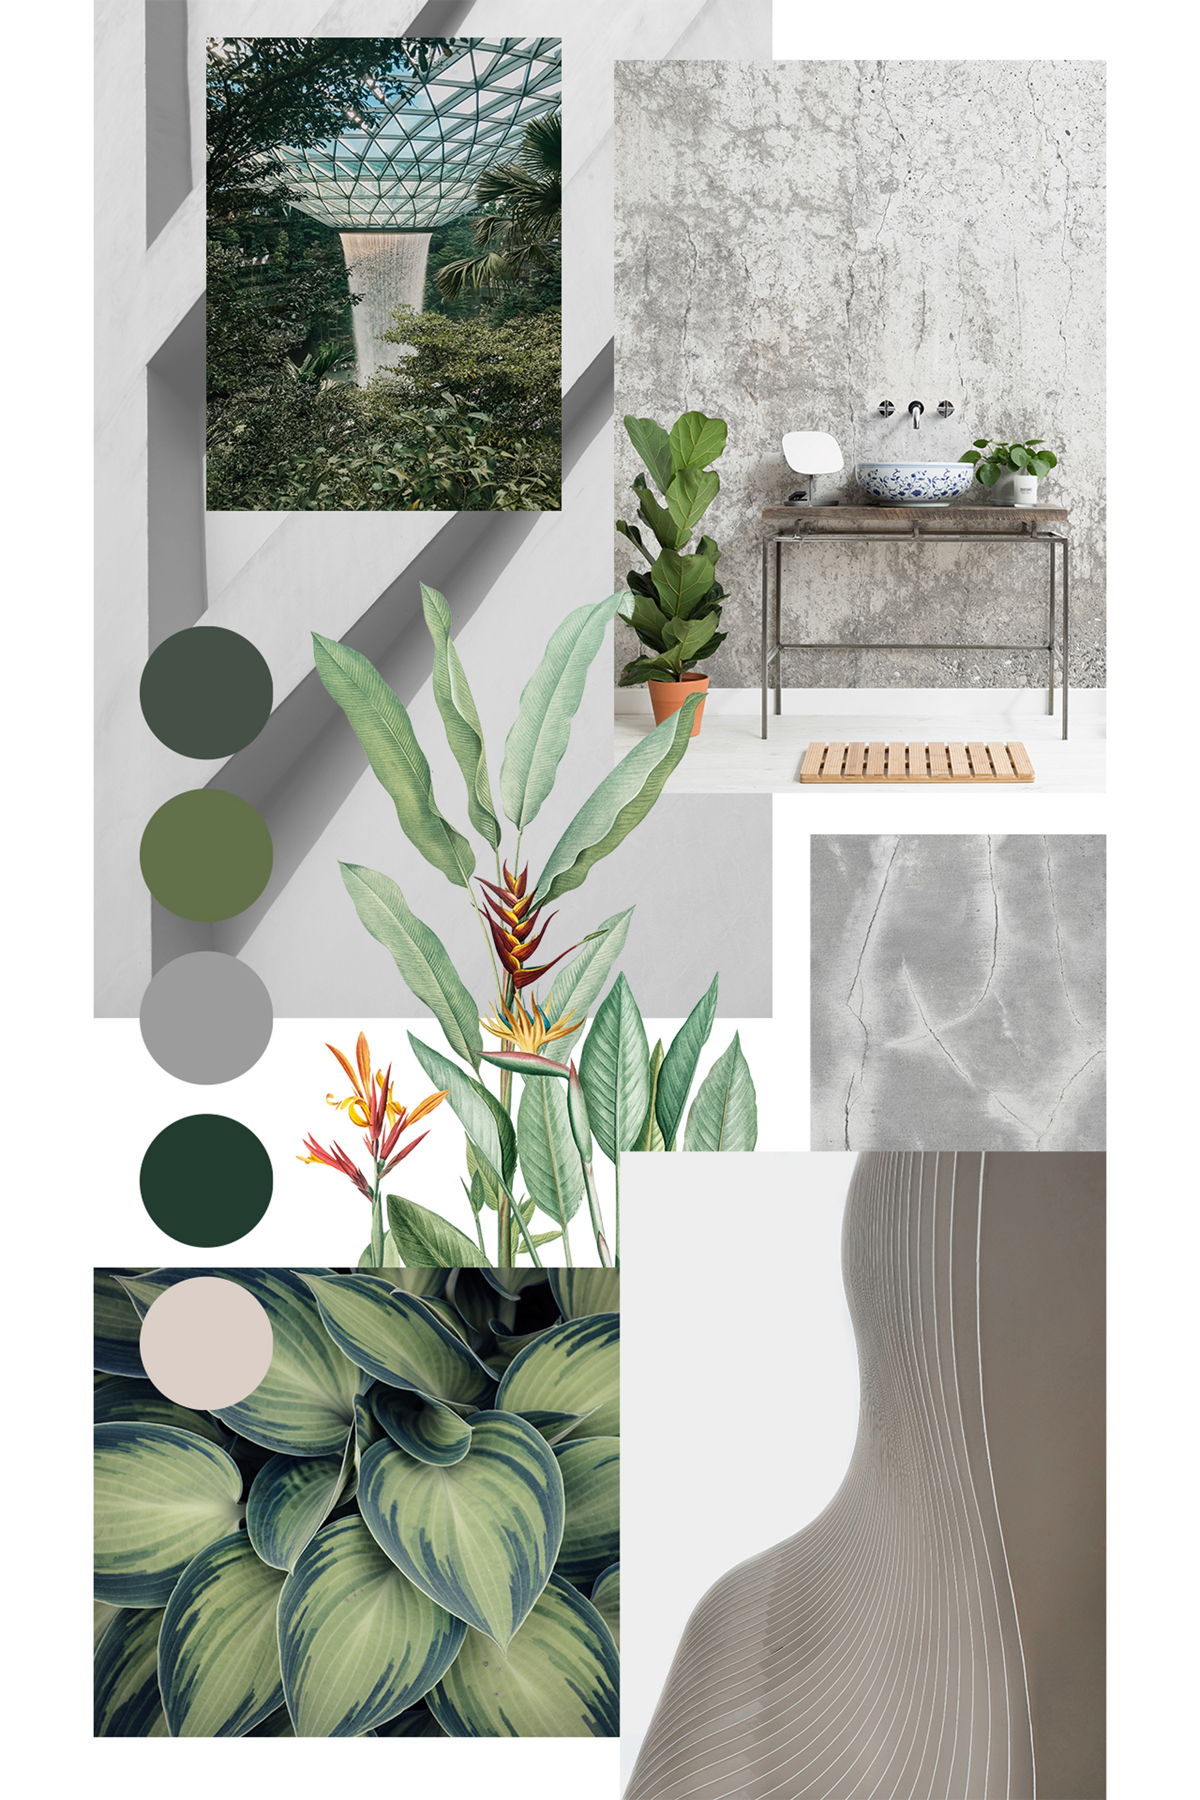 Plants and industrial textures will be invading our interior spaces